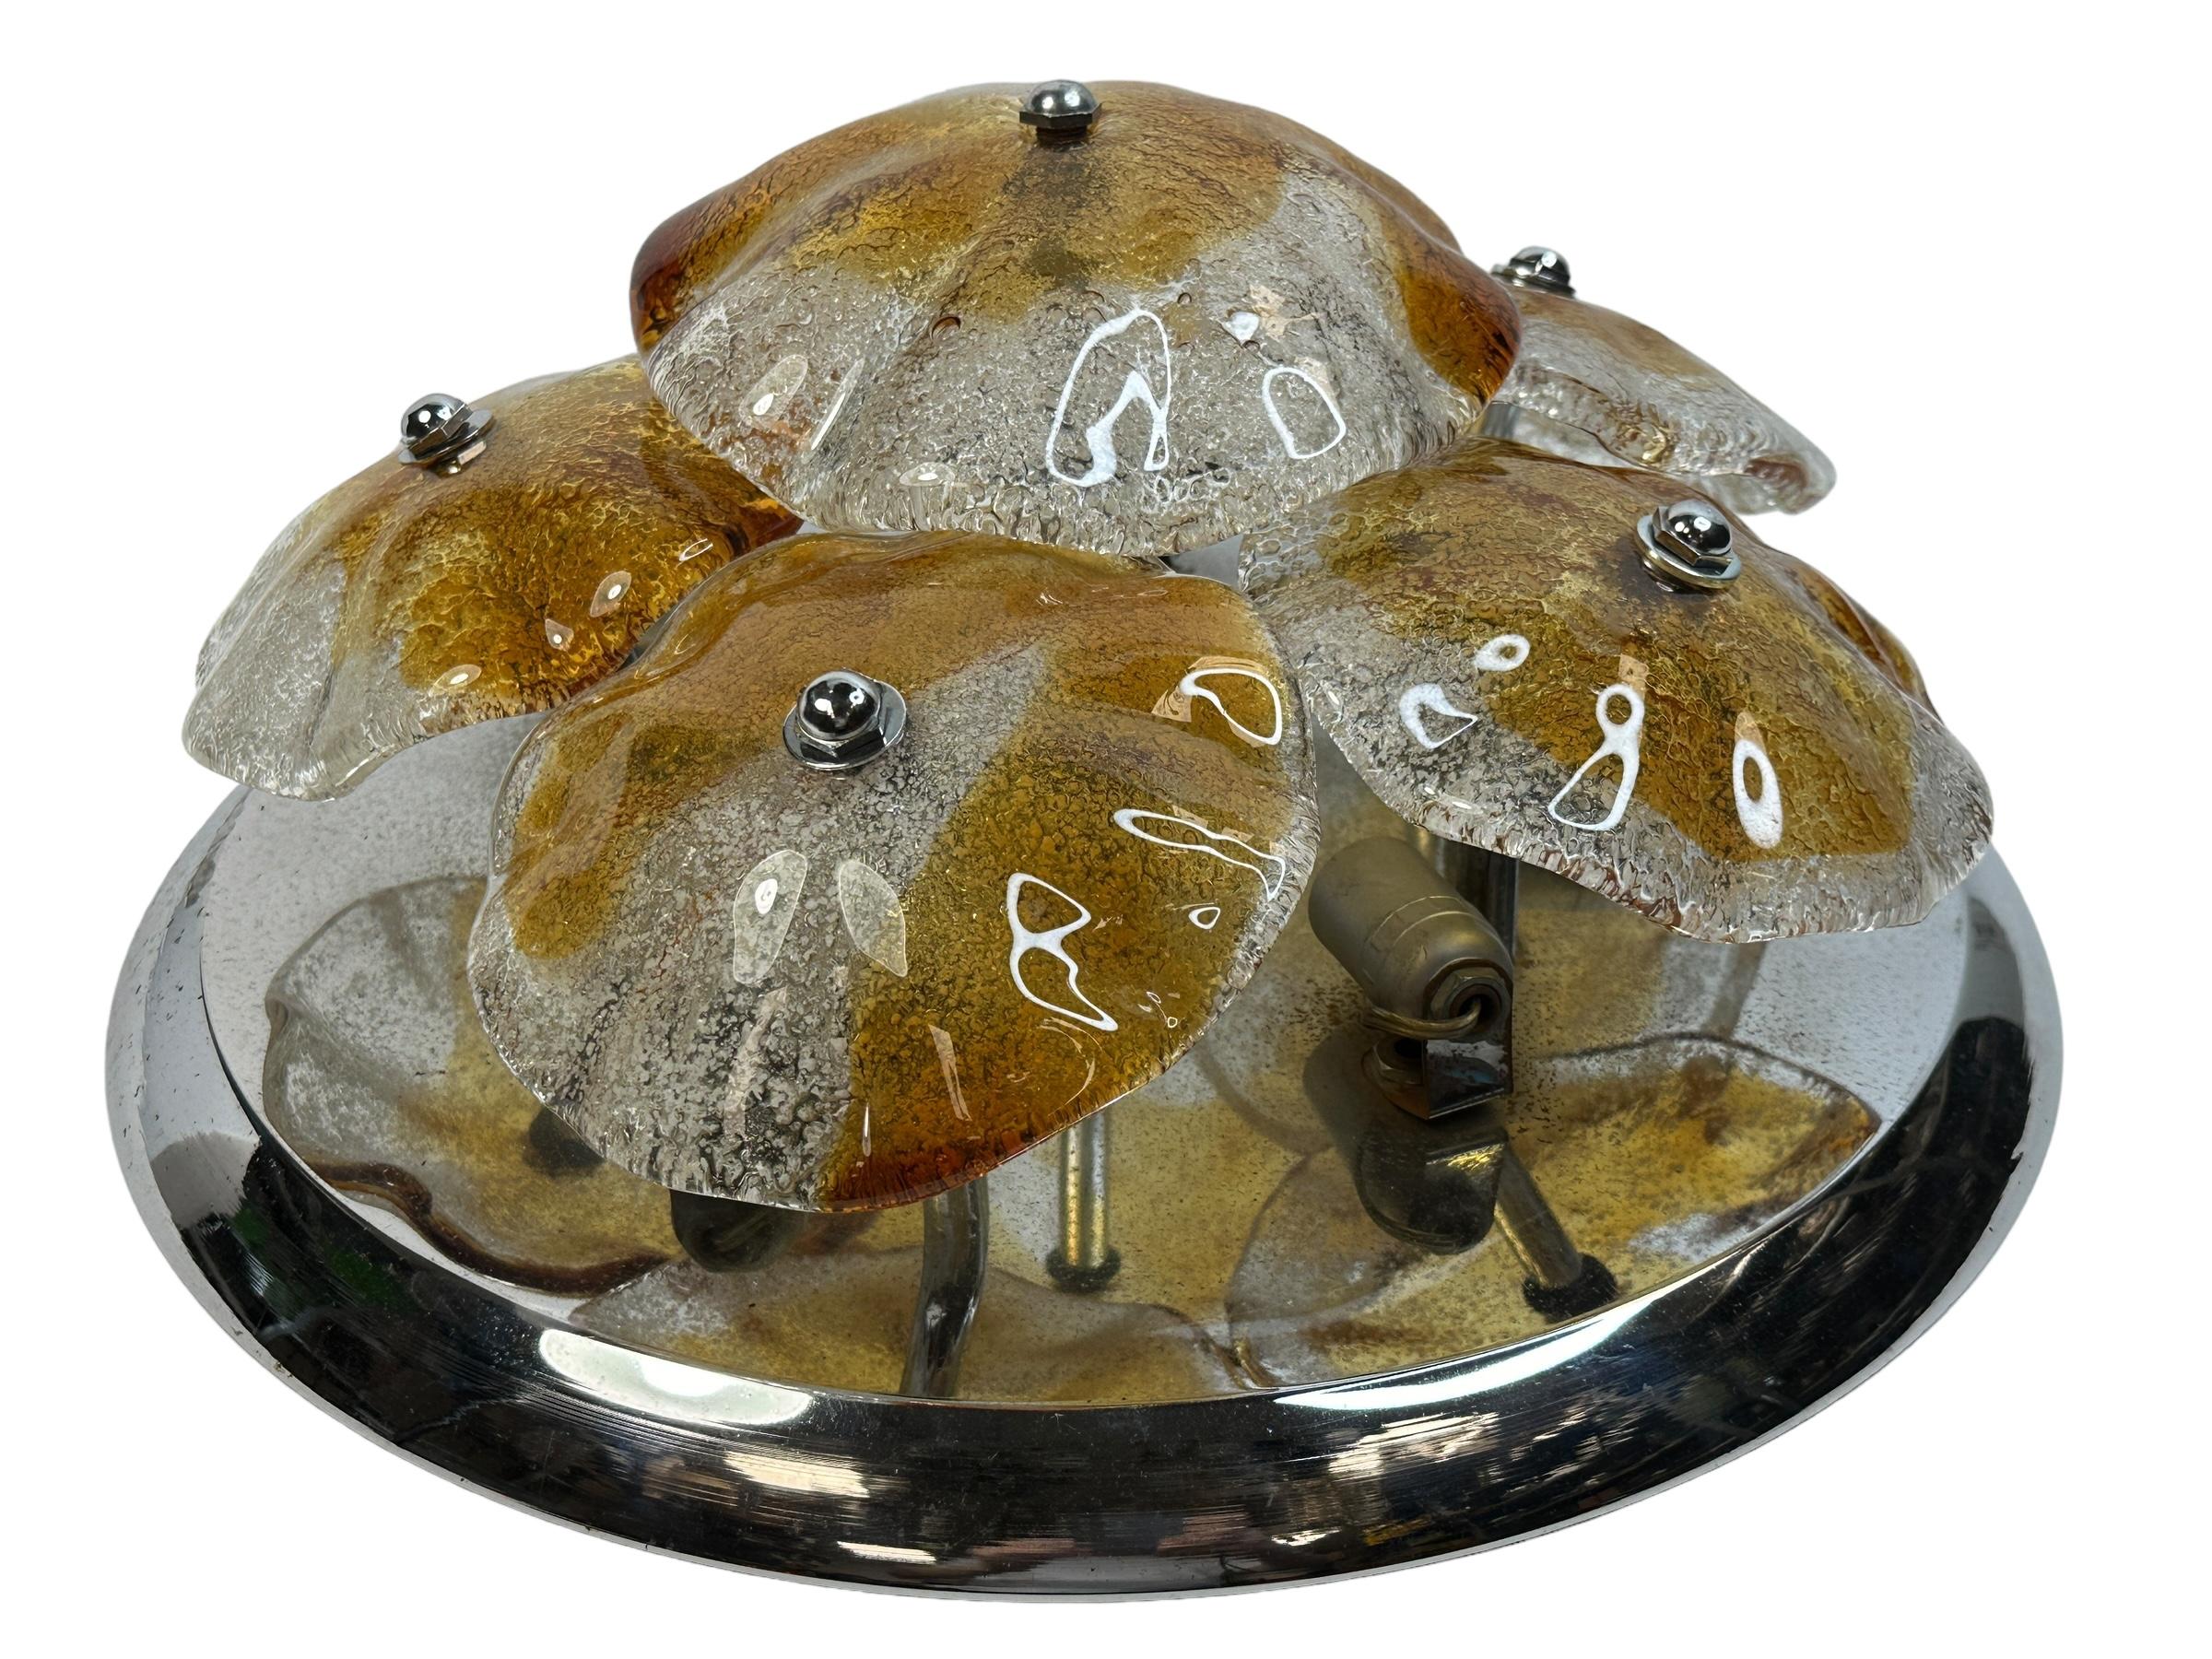 A large midcentury flush mounted Murano disc glass chandelier, textured curved glasses on a large mounting chrome plate. The ceiling light requires 5 European E14 / 110 Volt Candelabra bulbs, each bulb up to 40 watts. It is in very good condition